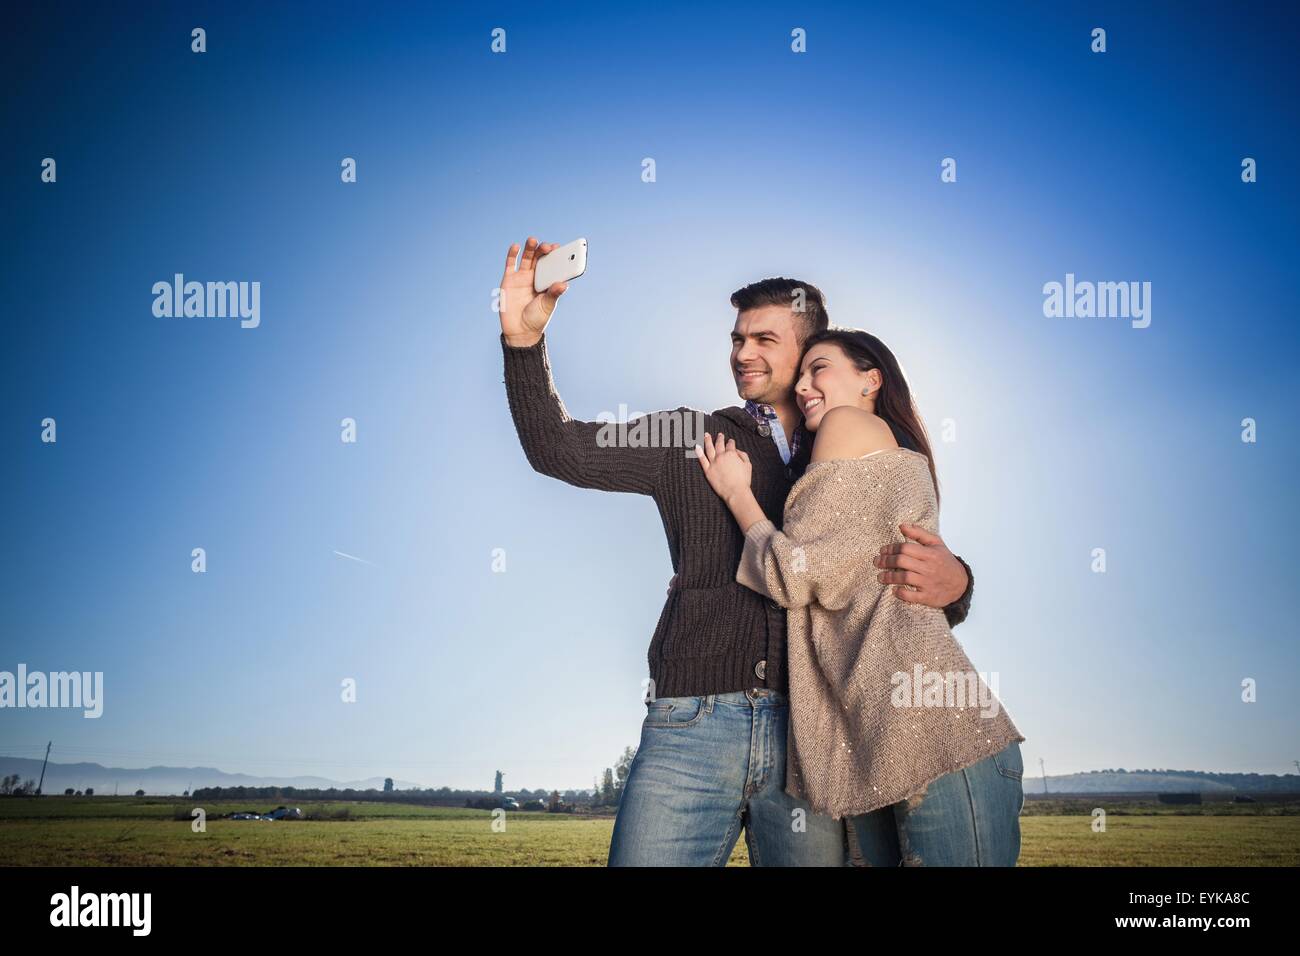 Jeune couple photographing themselves against blue sky Banque D'Images